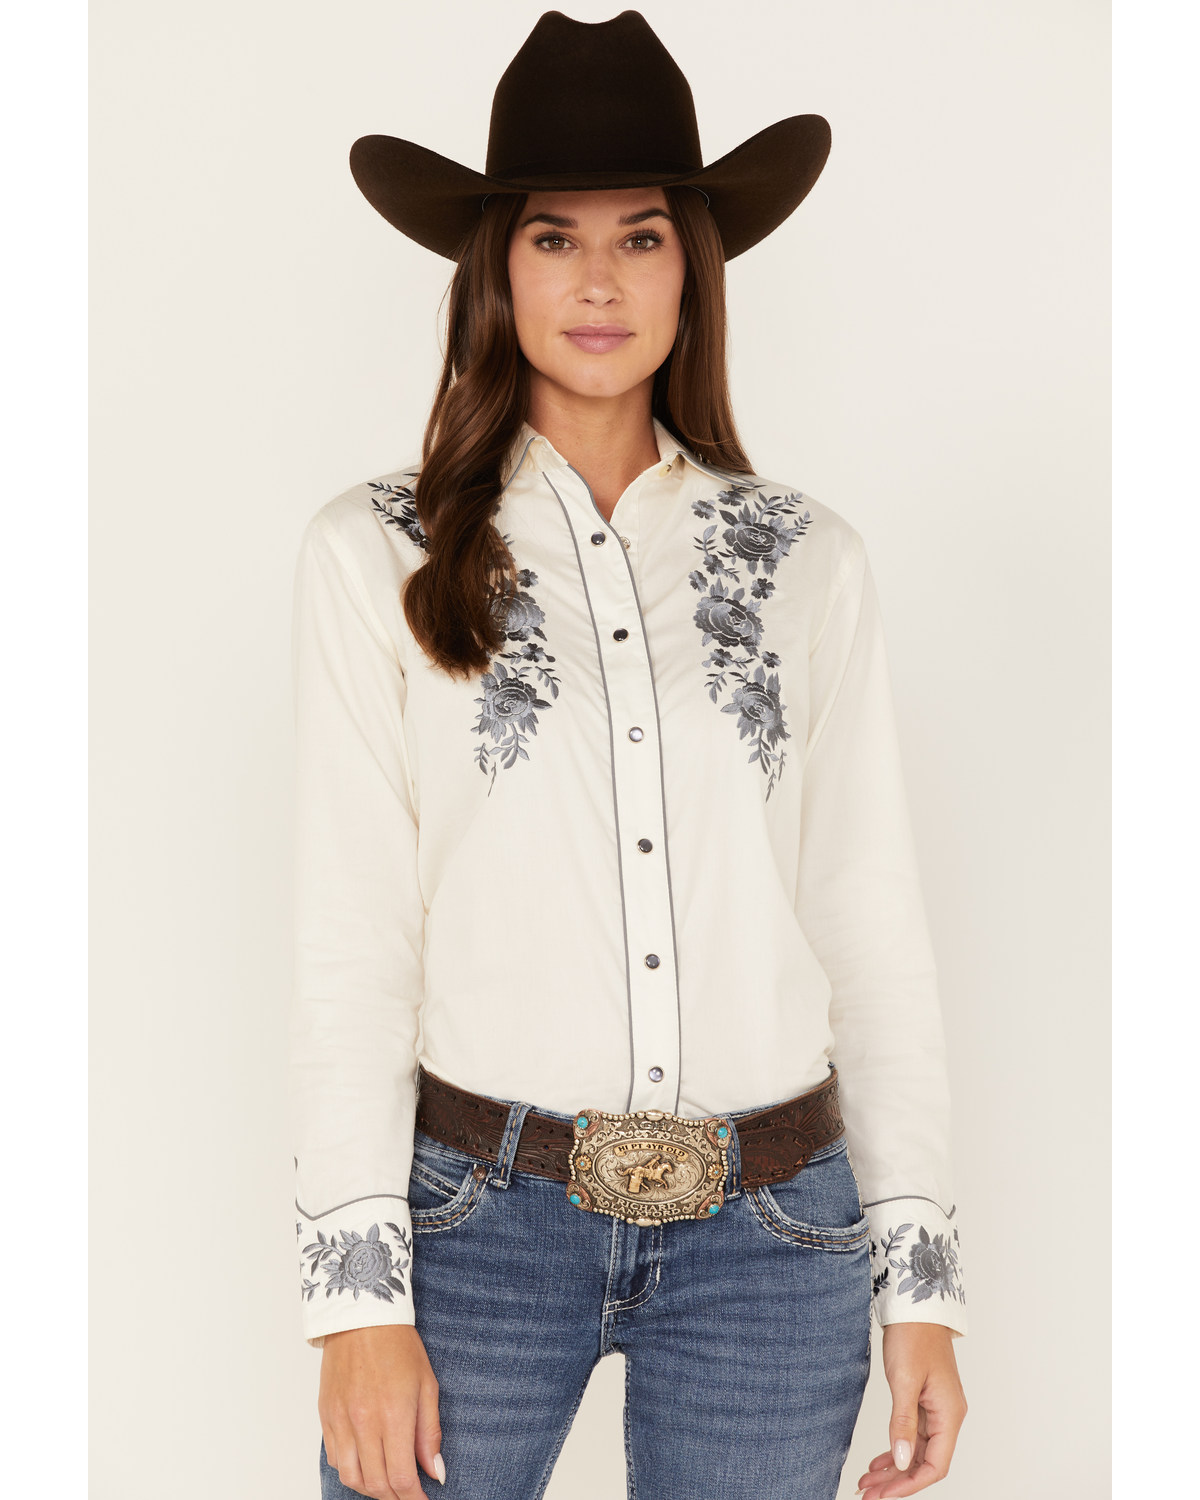 Rockmount Ranchwear Women's Cascading Embroidered Floral Print Long Sleeve Western Shirt